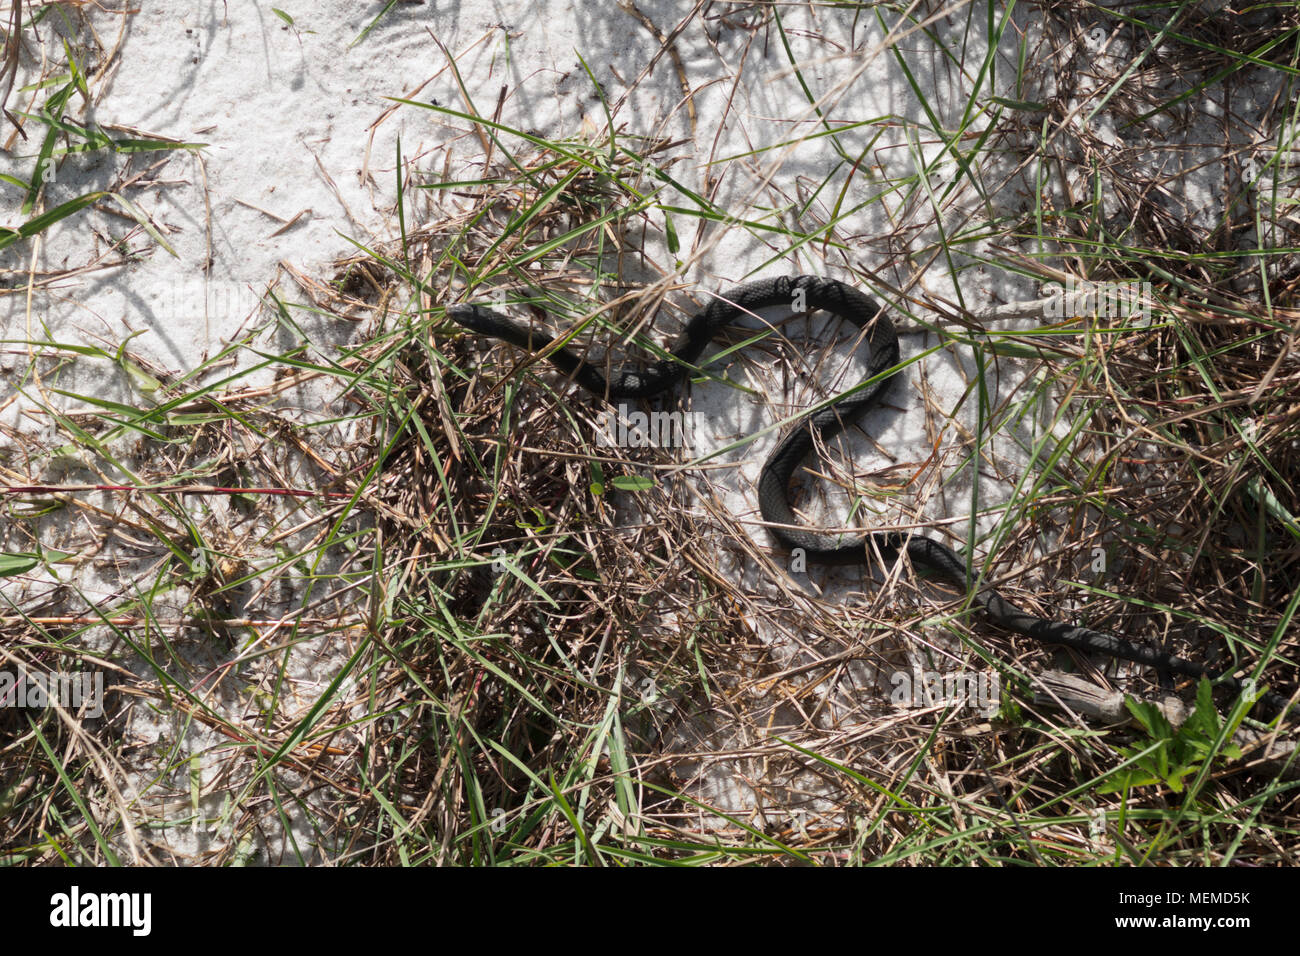 A Blue Racer snake slithering throuth the grass on the beach at the south end of Mobile Bay, Alabama. Stock Photo